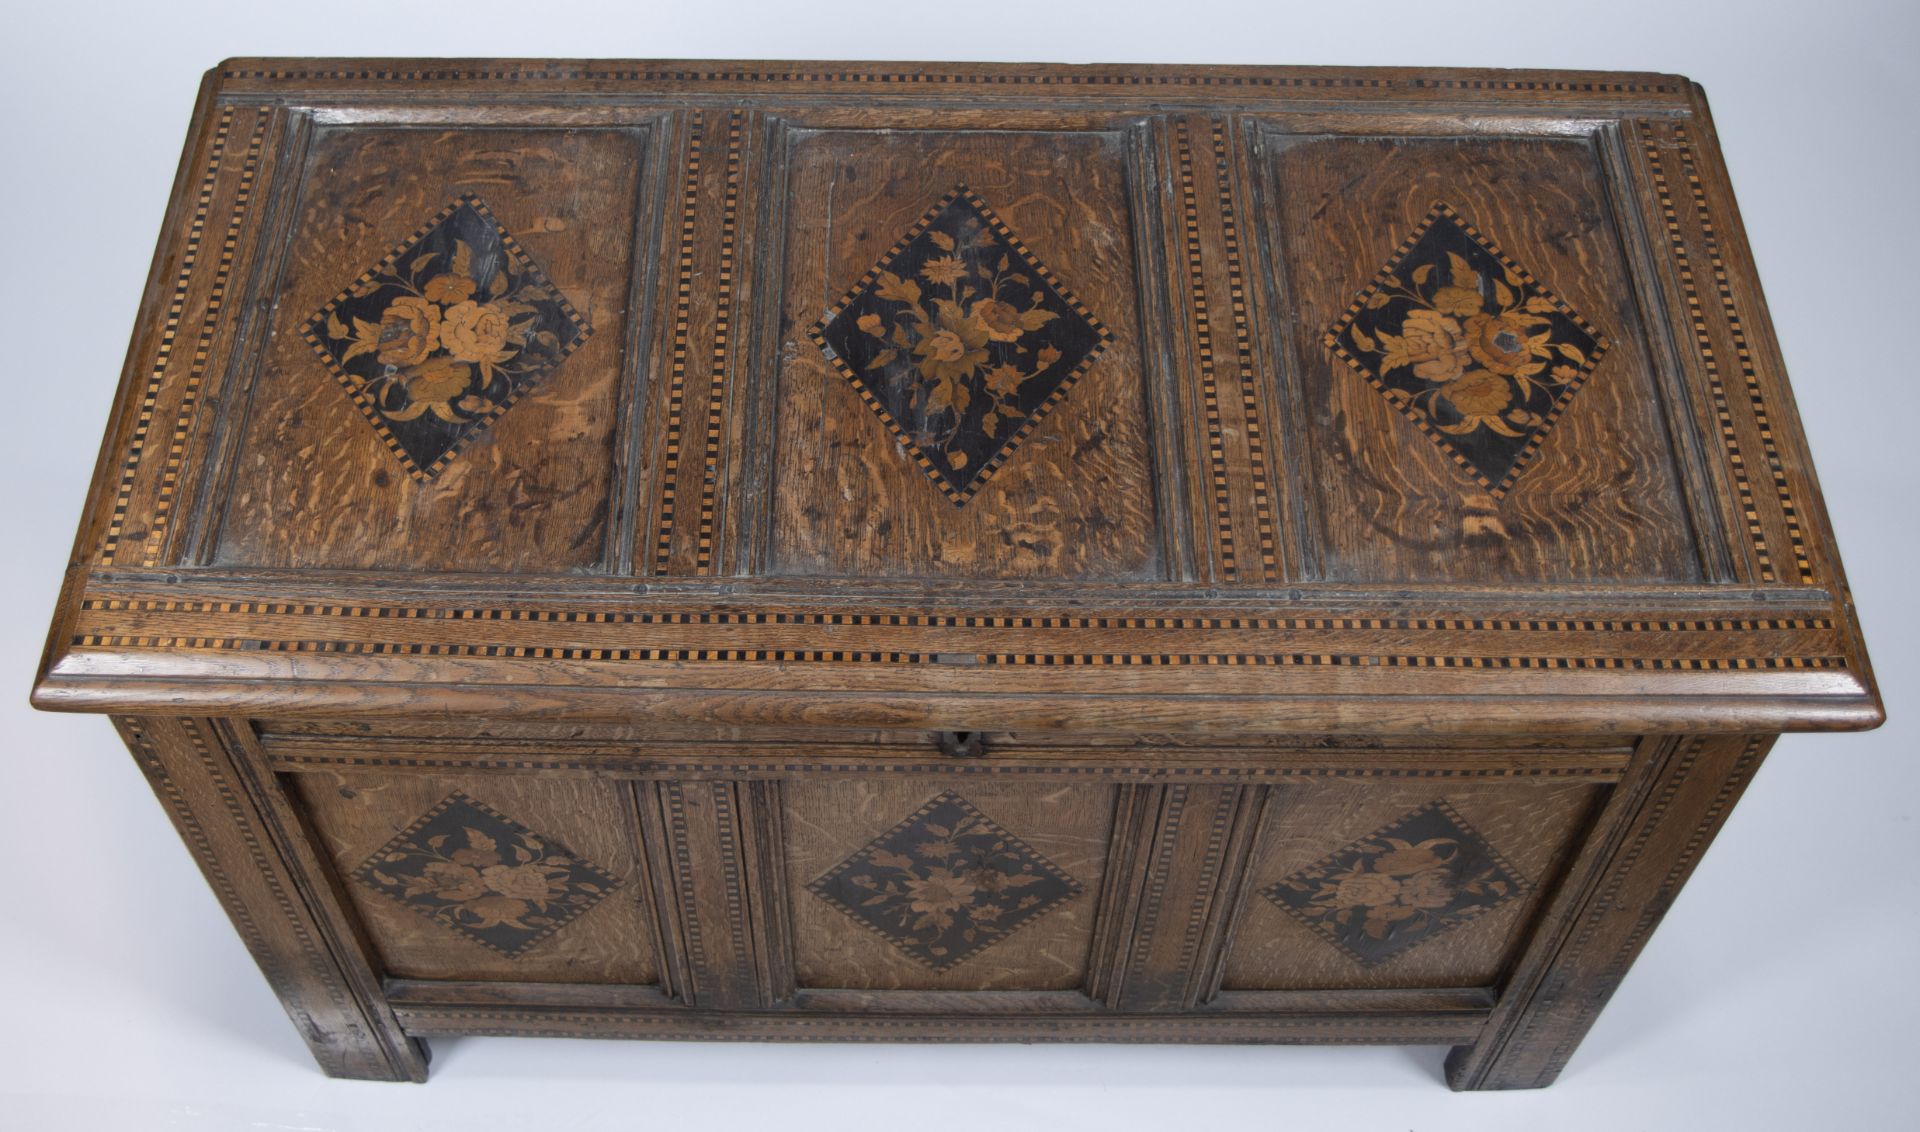 18th-century oak blanket chest with floral inlay and geometric block pattern - Image 2 of 4